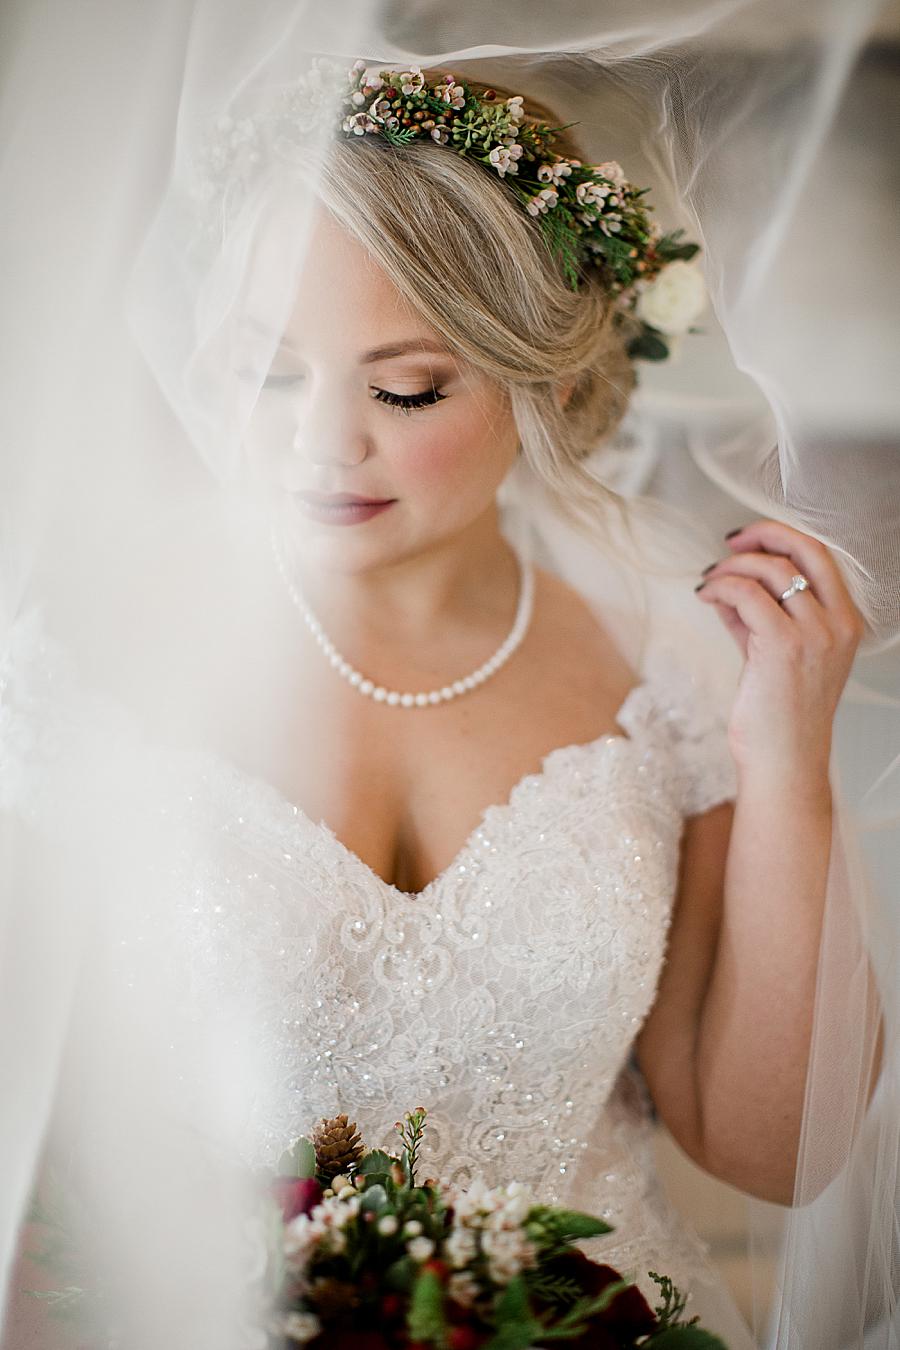 Under the veil at this bridal session by Knoxville Wedding Photographer, Amanda May Photos.